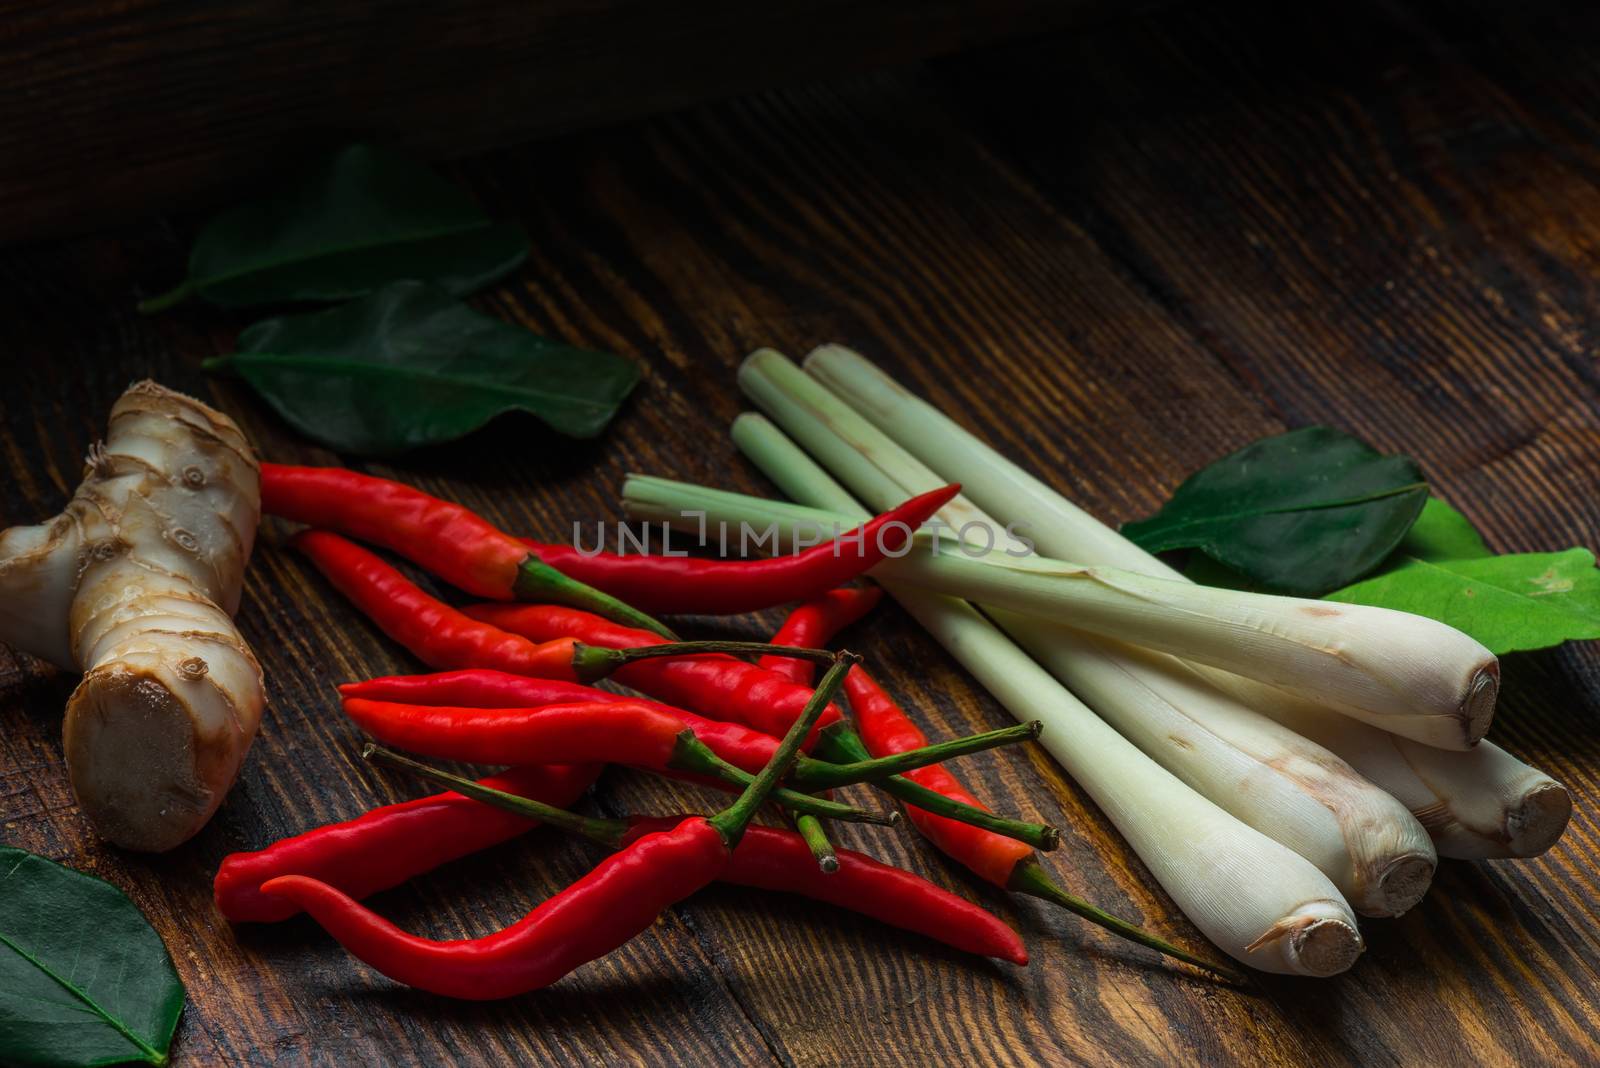 Chili peppers with galangal root, leaf of kaffir lime and lemongrass by Seva_blsv